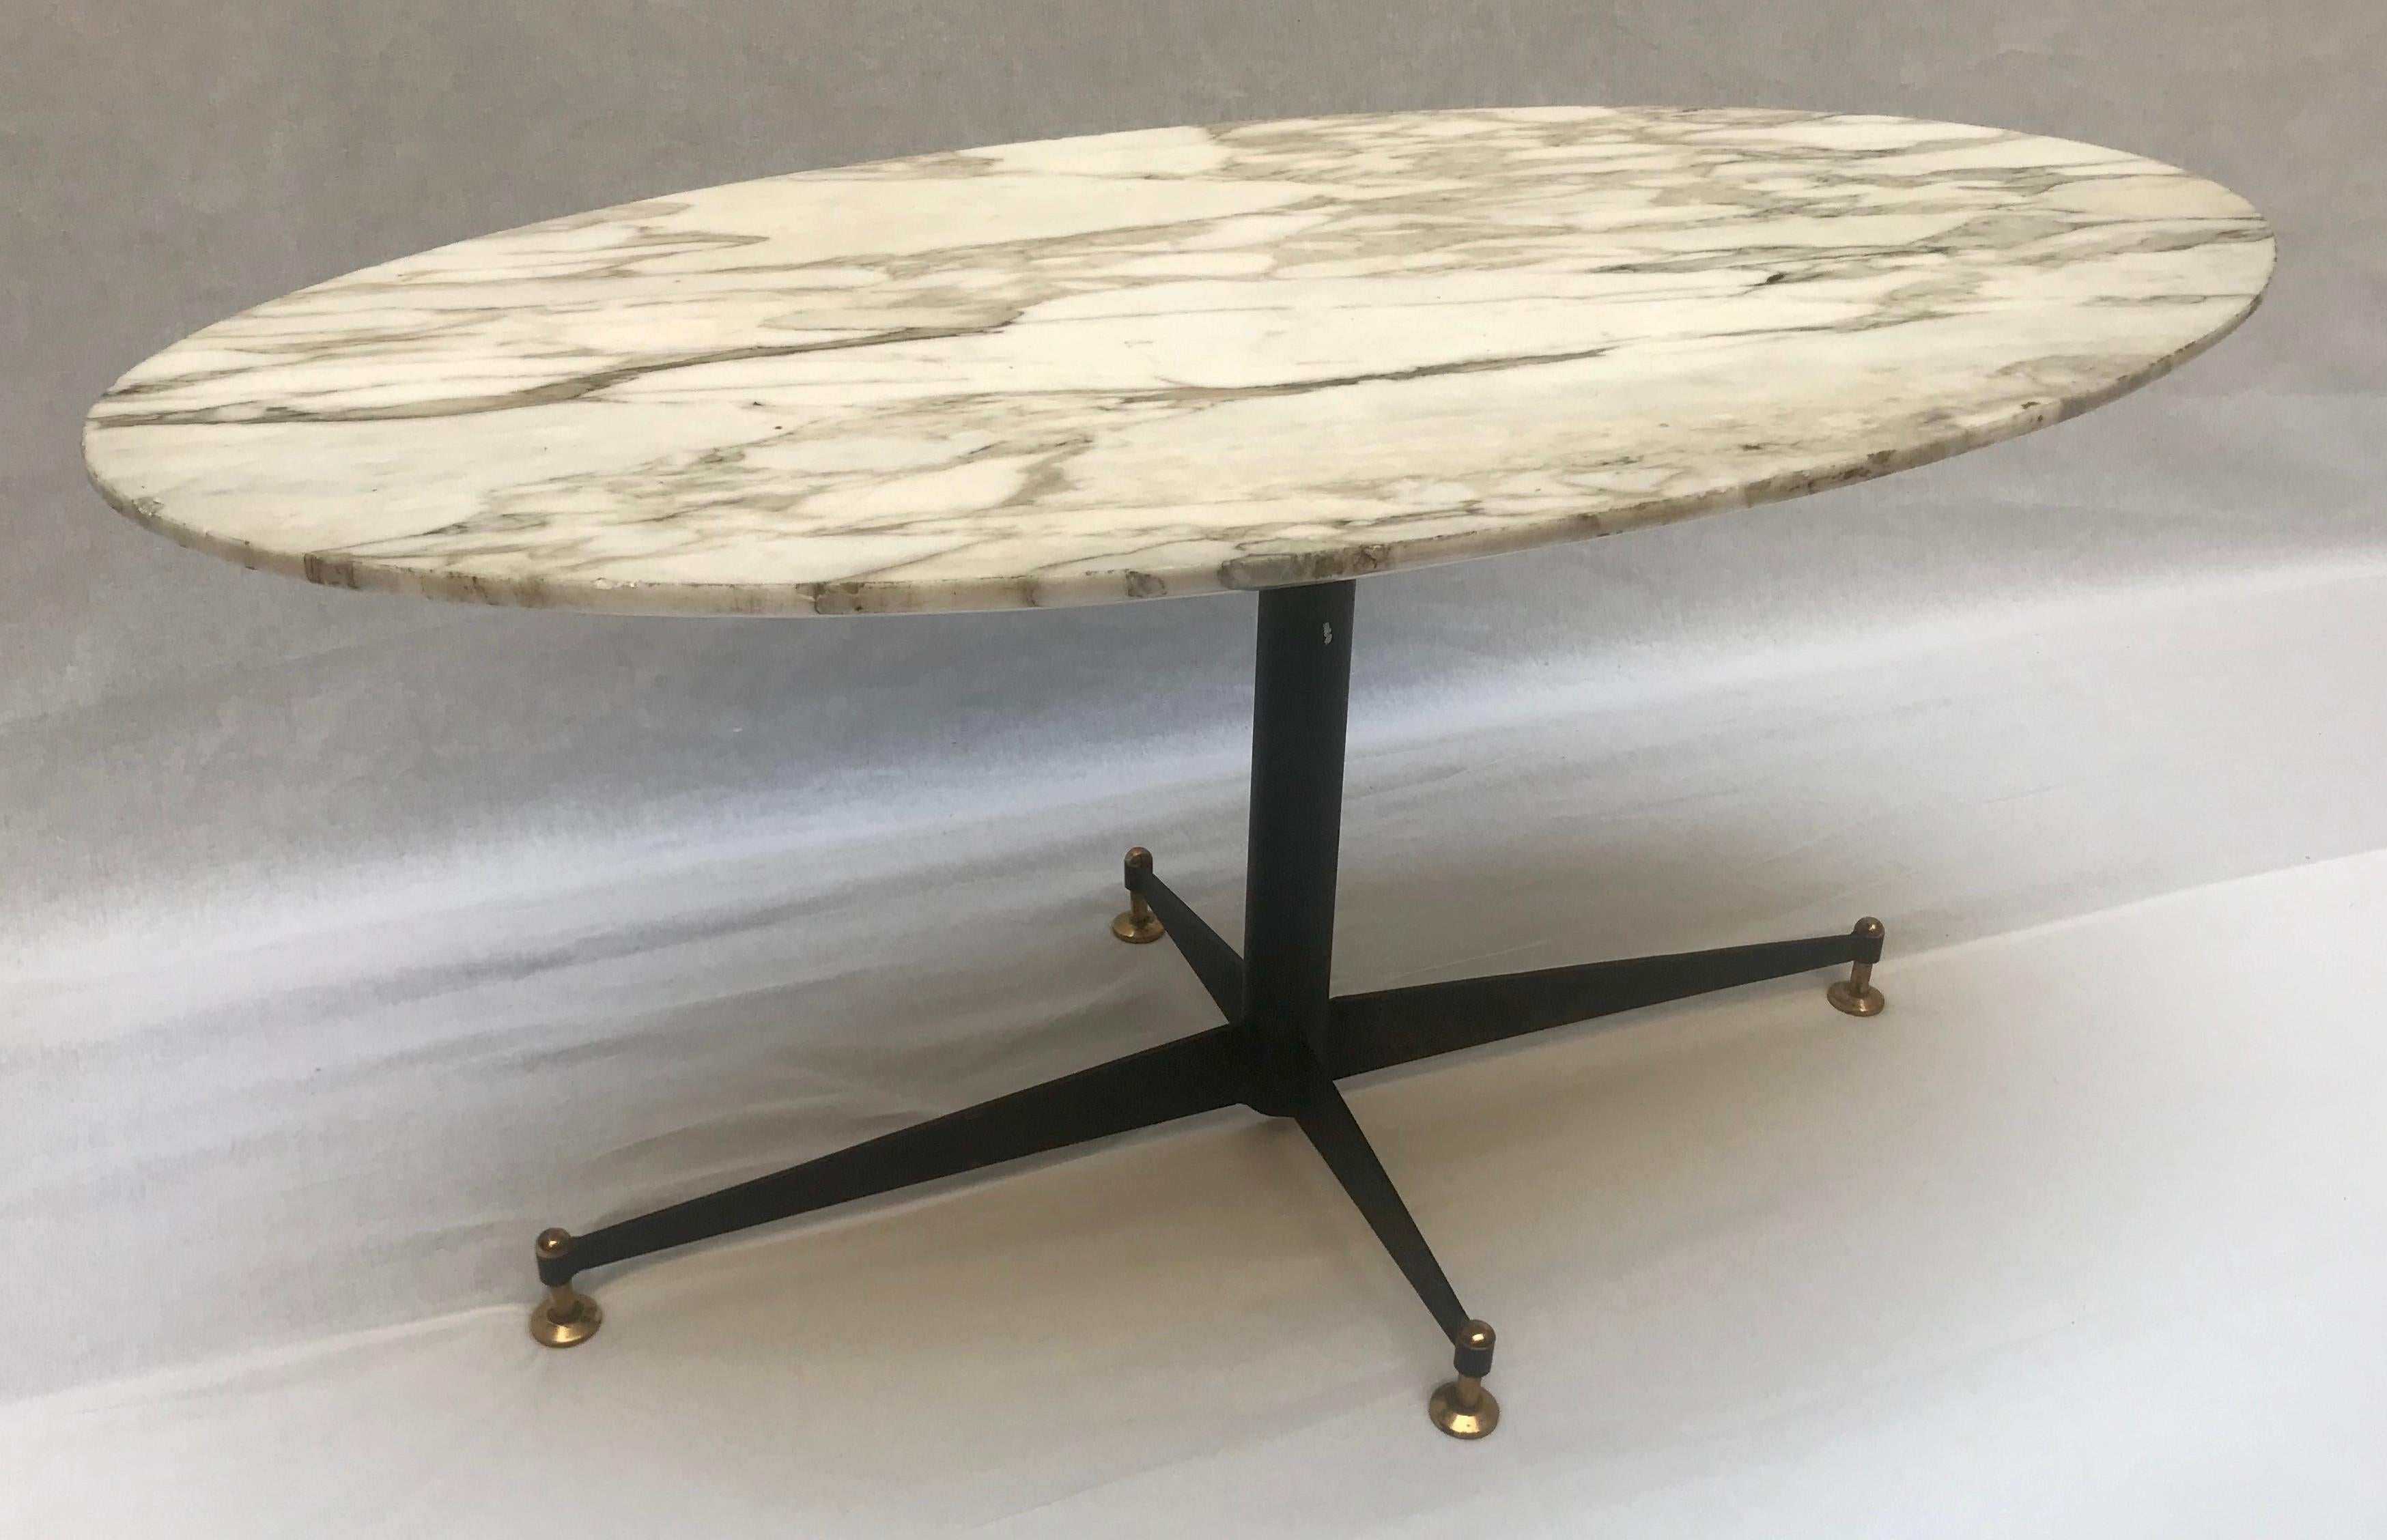 Midcentury Italian coffee table with marble top,

circa 1950.